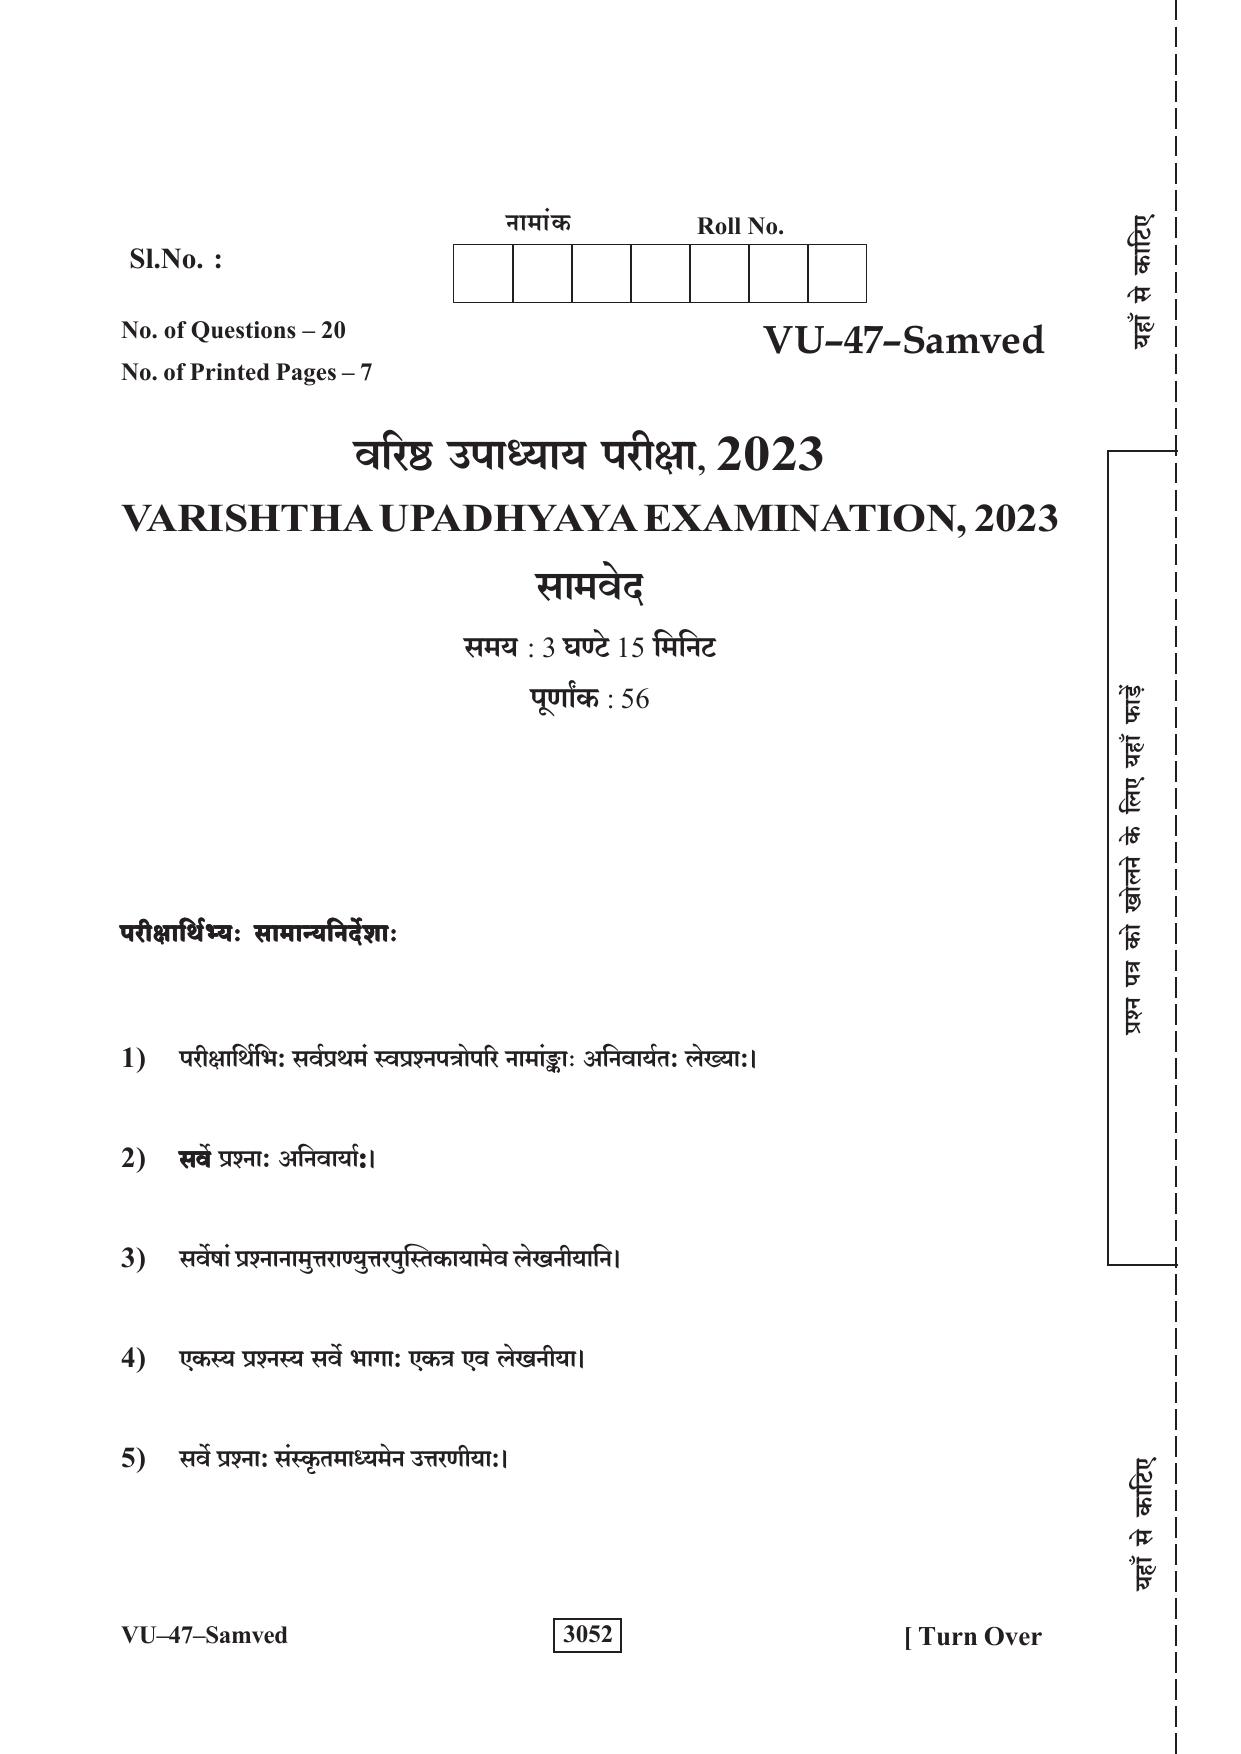 RBSE 2023 Samved Varishtha Upadhyay Question Paper - Page 1